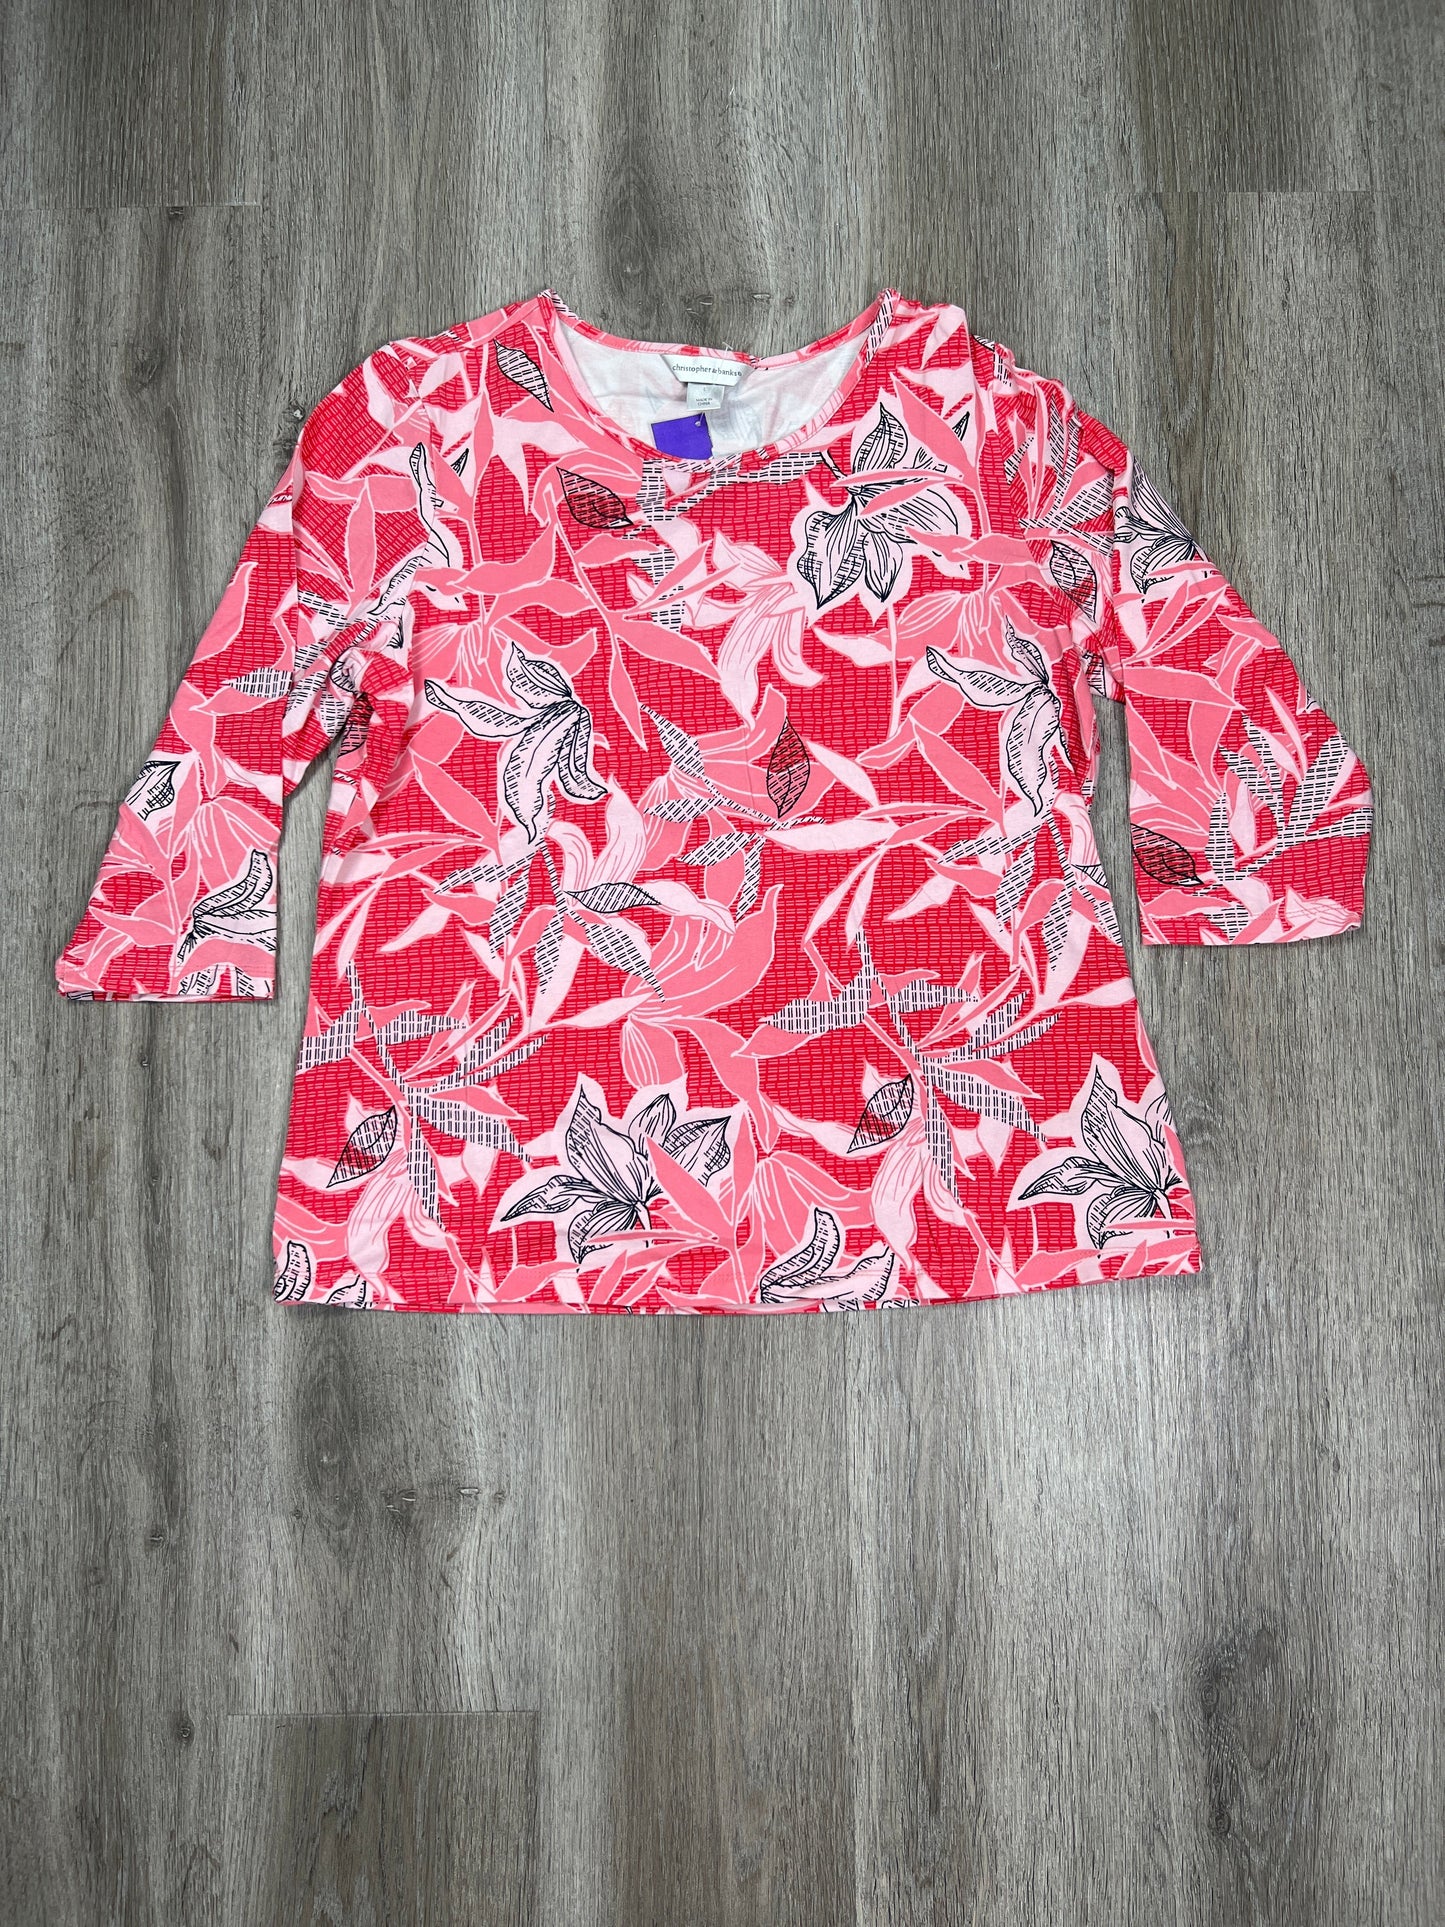 Pink Top 3/4 Sleeve Christopher And Banks, Size L